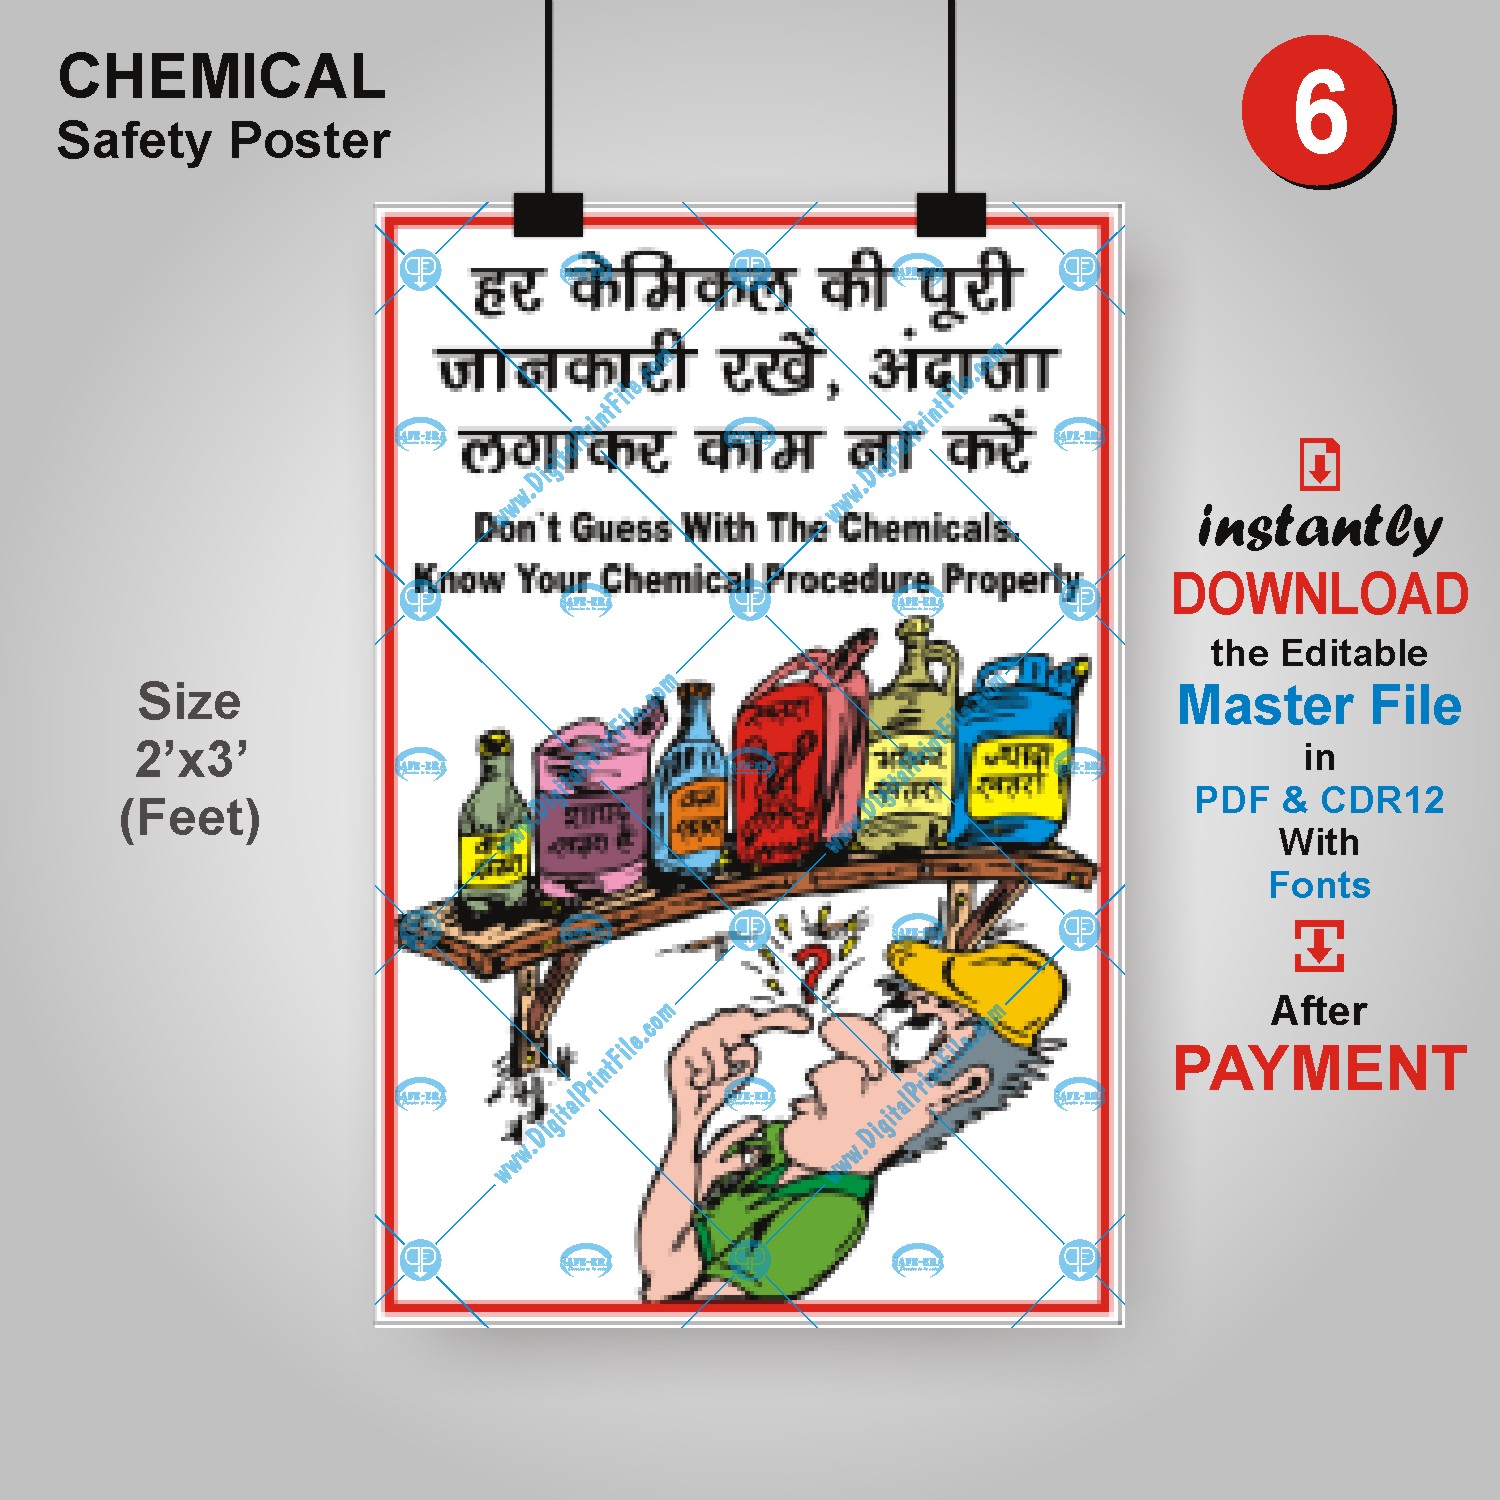 Shop chemical handling poster | Buysafetyposters.com